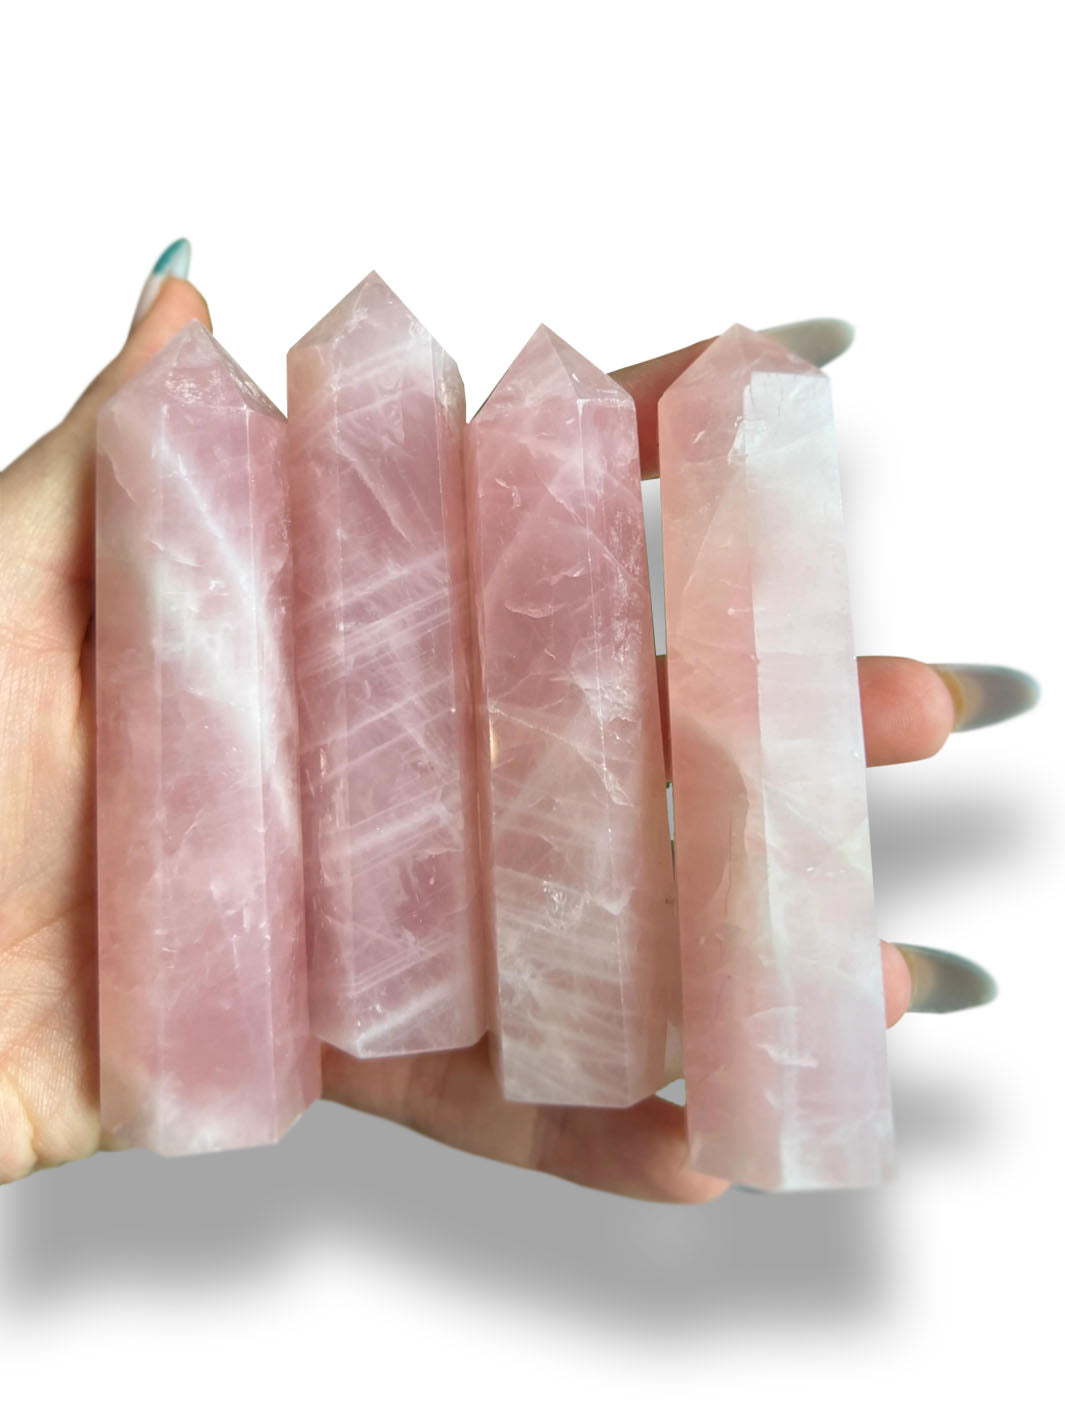 Earthly Comfort Rose Quartz Crystal Tower Earthly Comfort Rose Quartz EAC0027-1